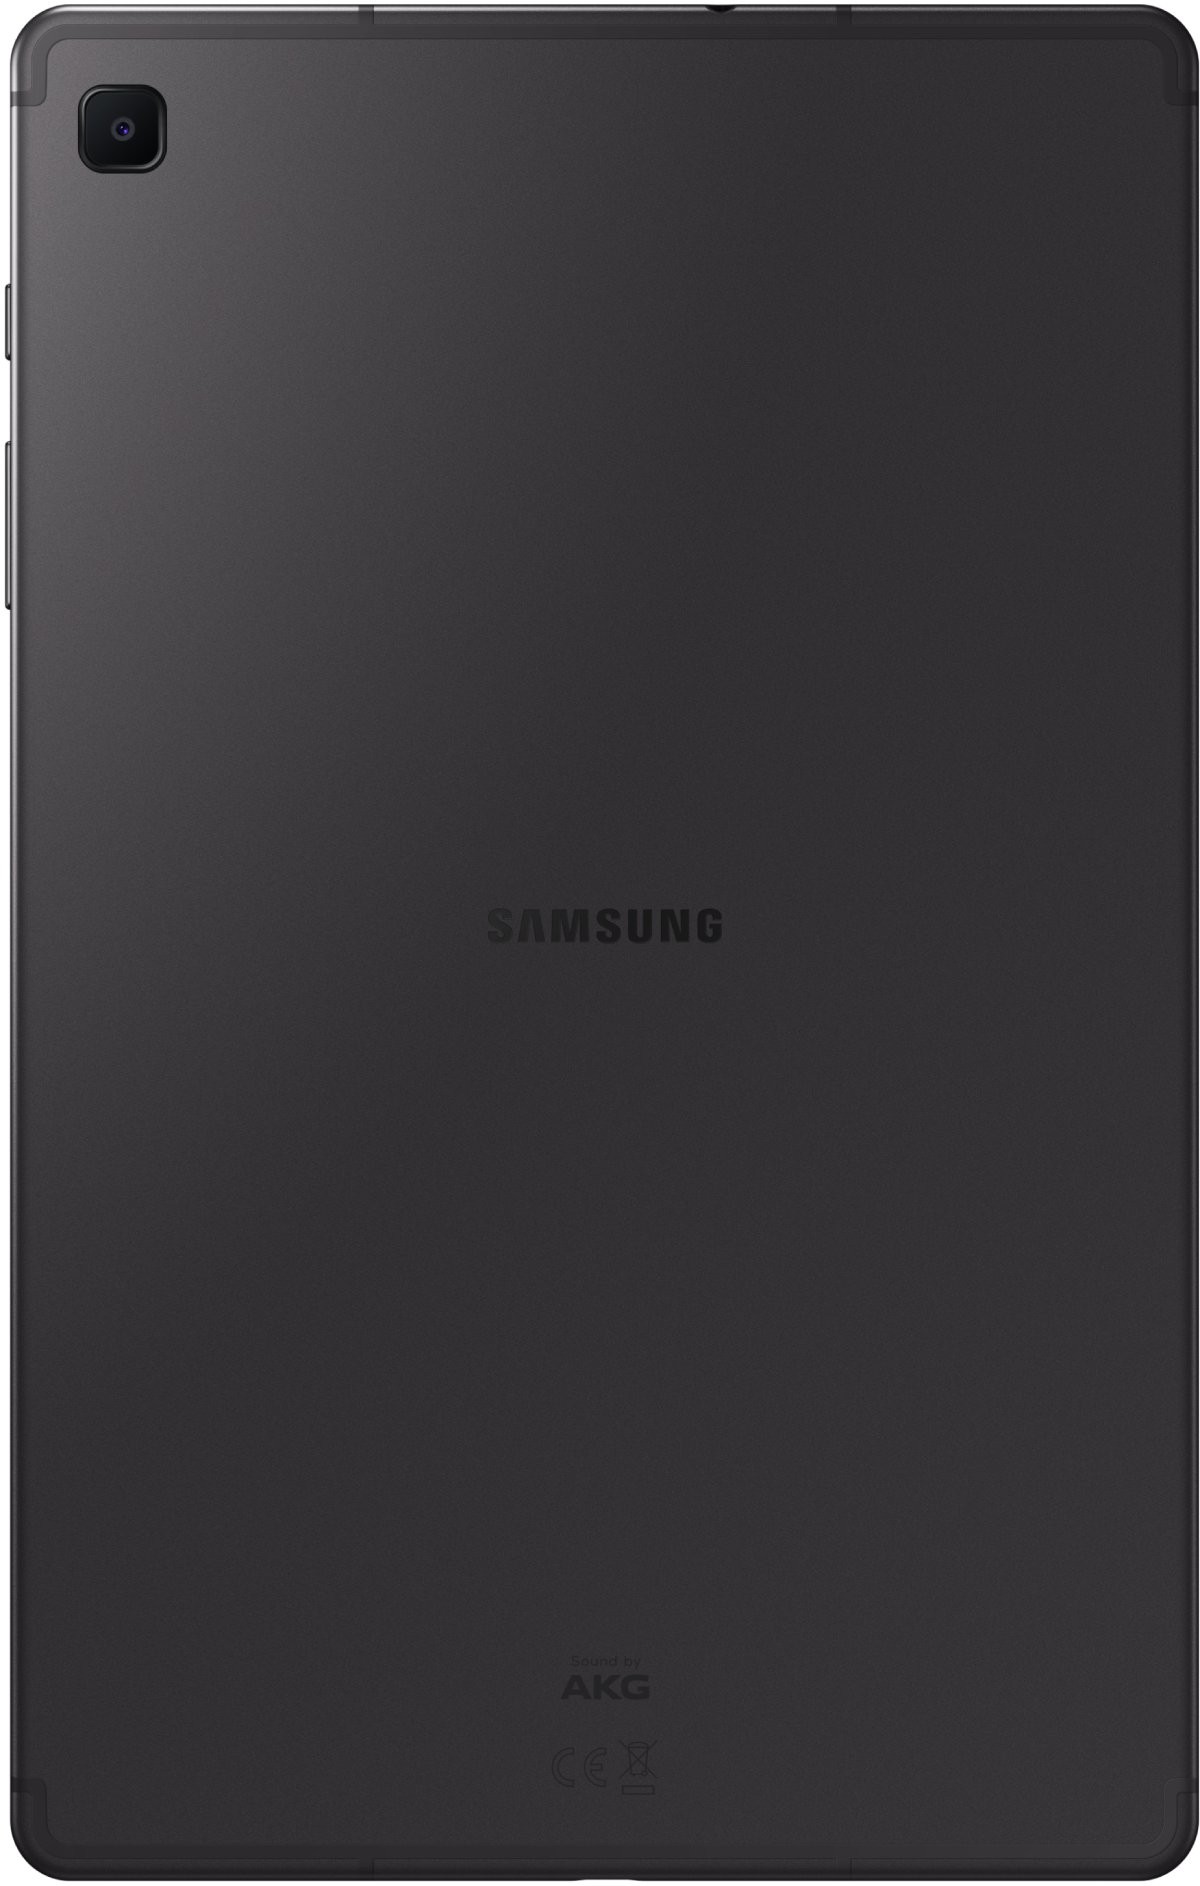 SAMSUNG Tablette tactile Tab S6 Lite 10.4" WiFi 64Go Gray - SM-P613NZAAXEF